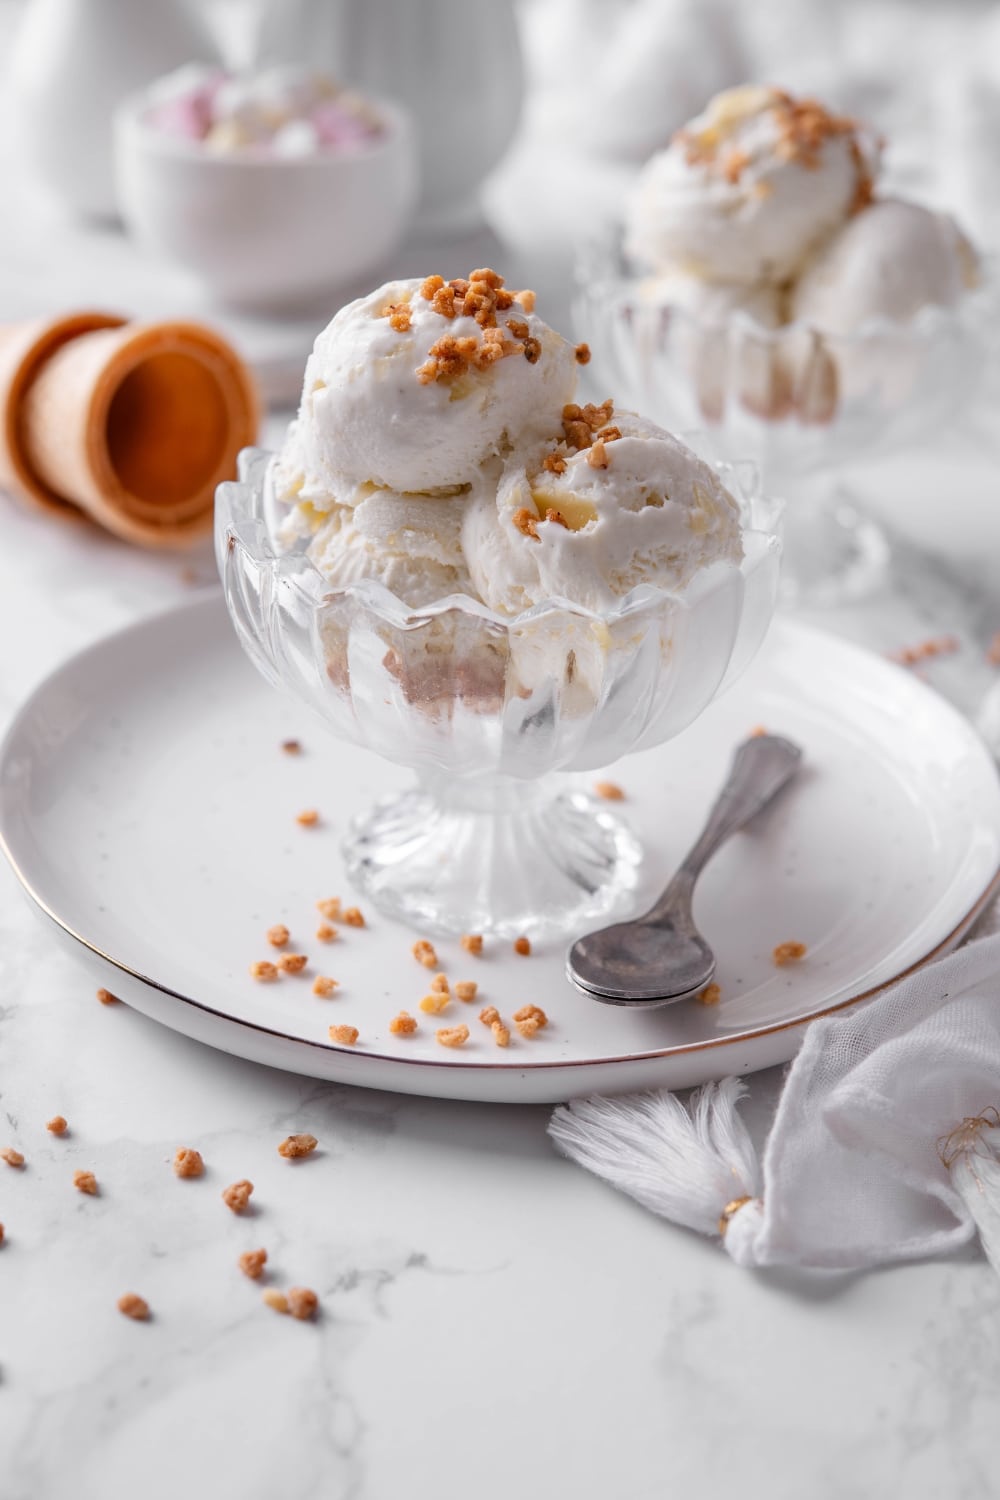 Three scoops of vanilla protein ice cream in a glass sundae bowl on a white plate with a spoon to the side. There are some nuts sprinkled on top.